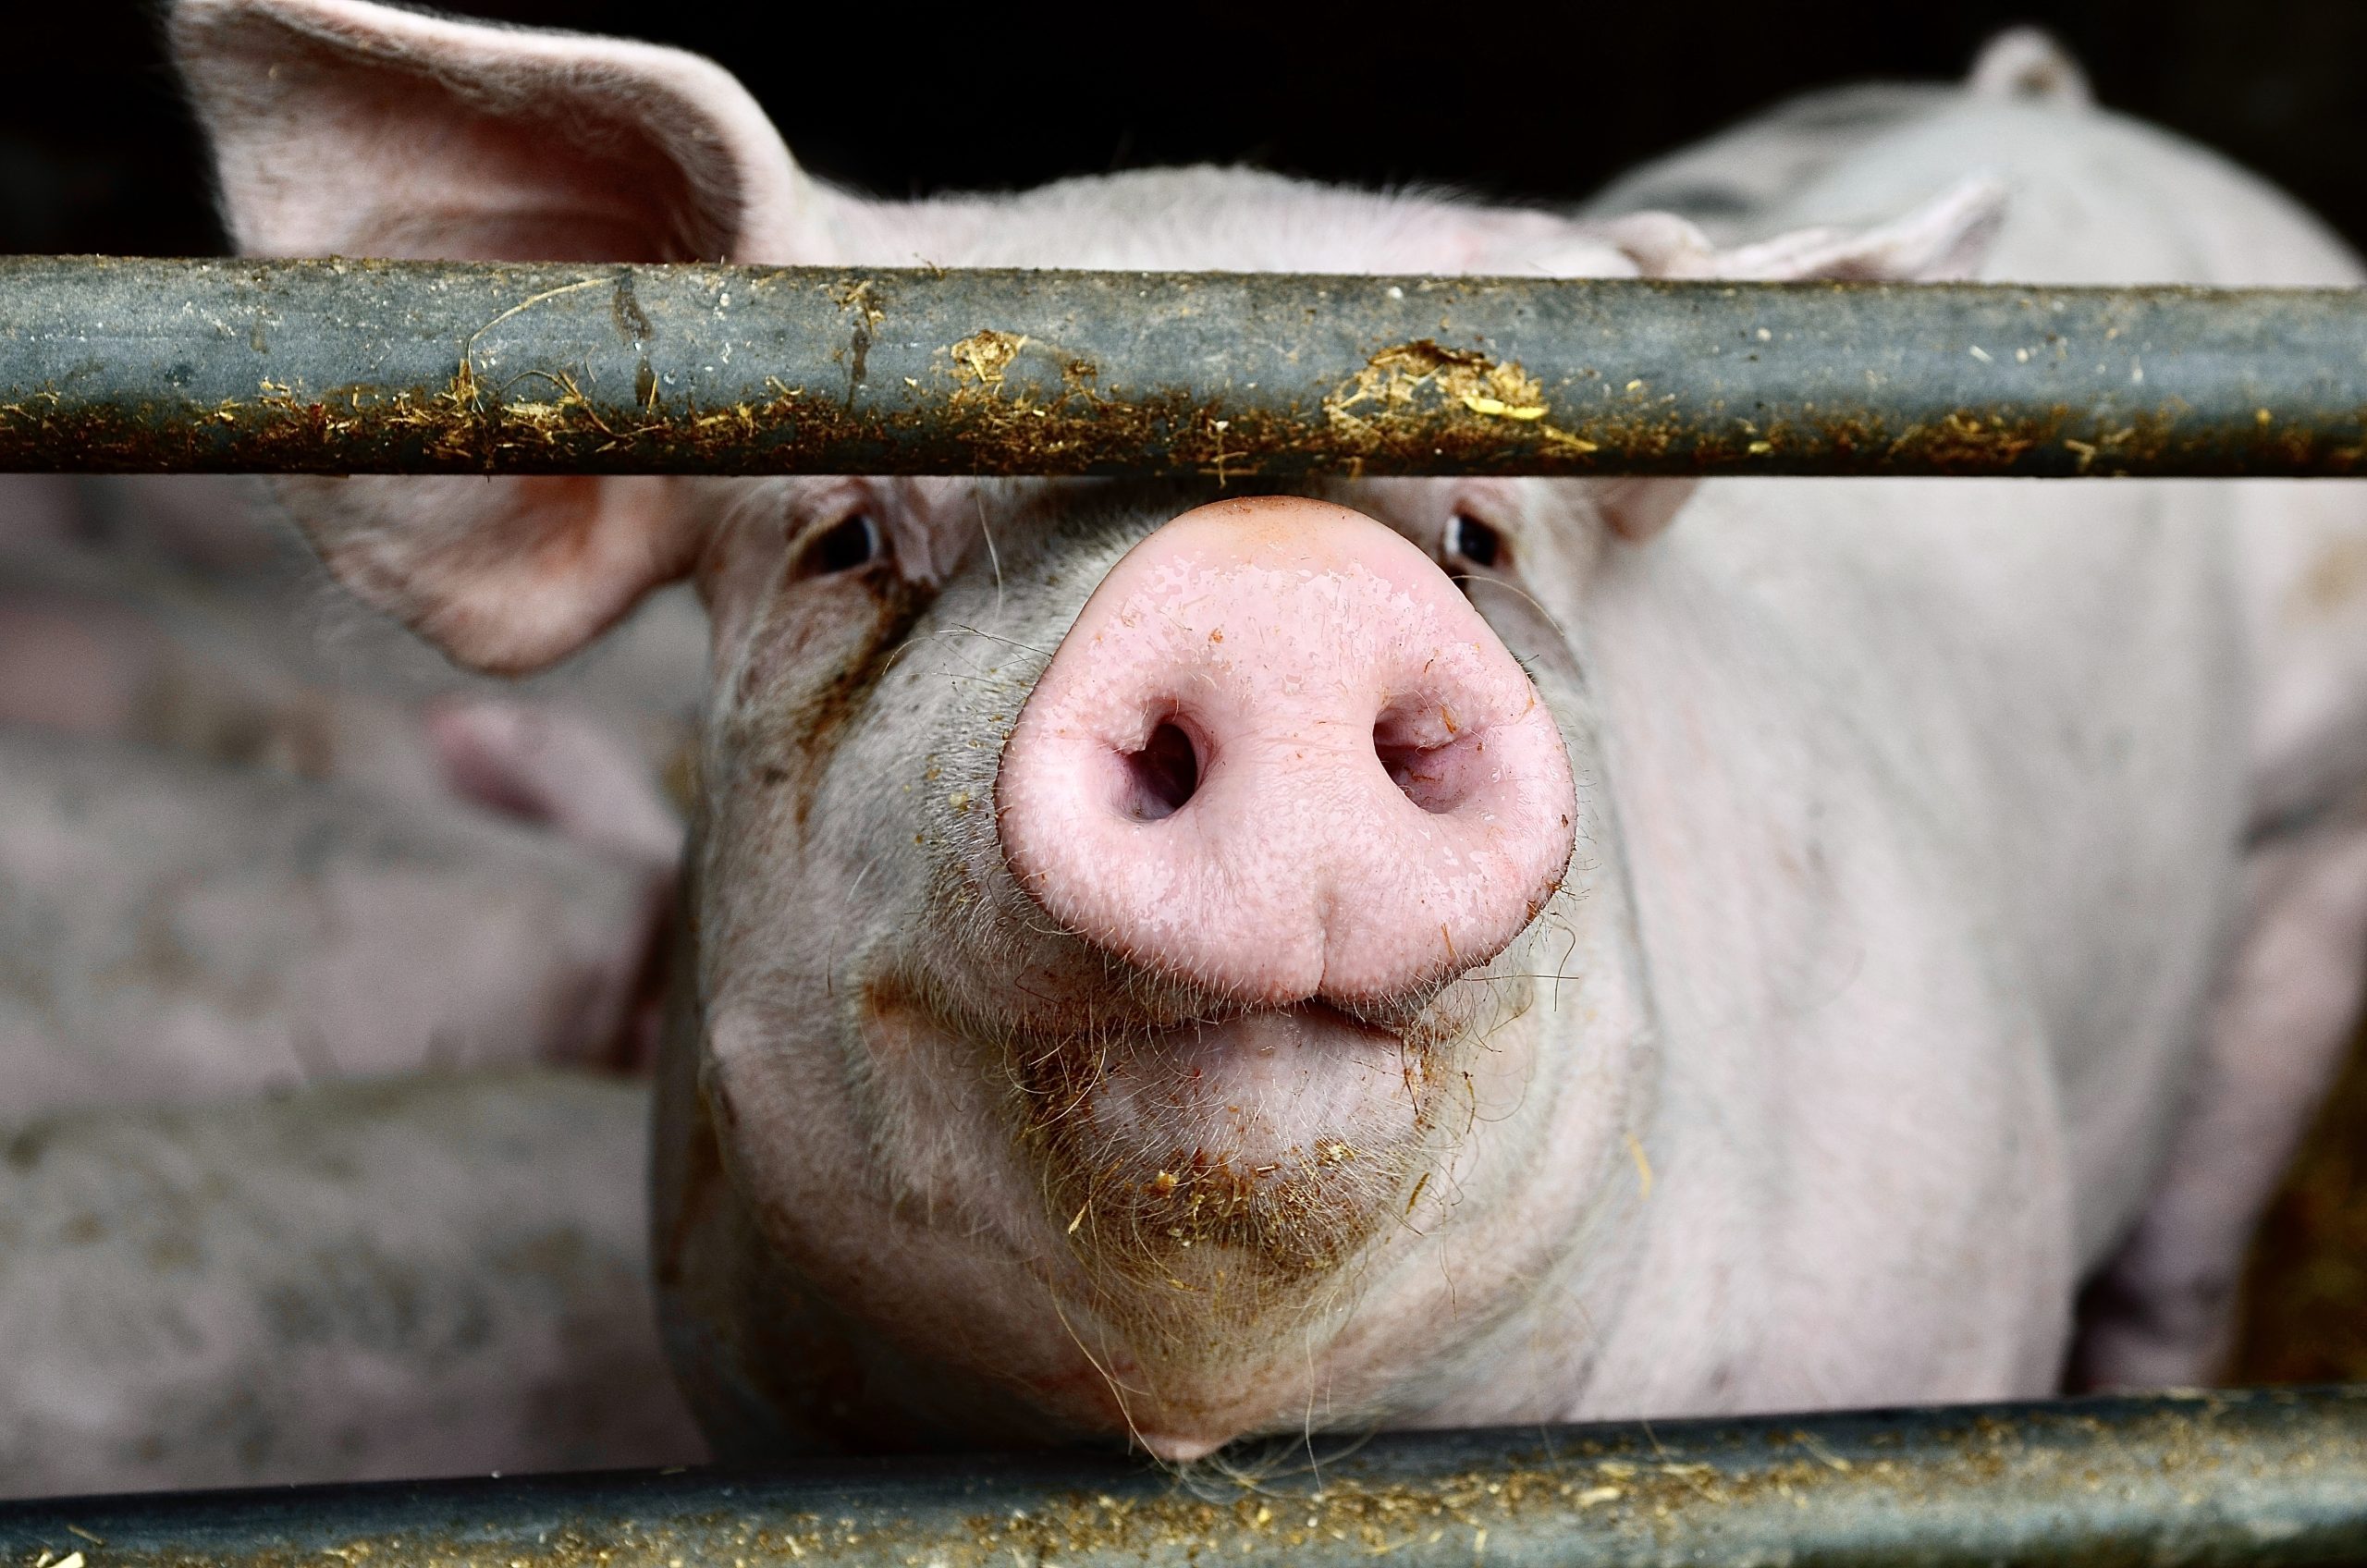 World Animal Protection Reveals The Harsh Impact On Our Planet From The Factory  Farming Of Pigs & Chickens For Their Meat - World Animal News